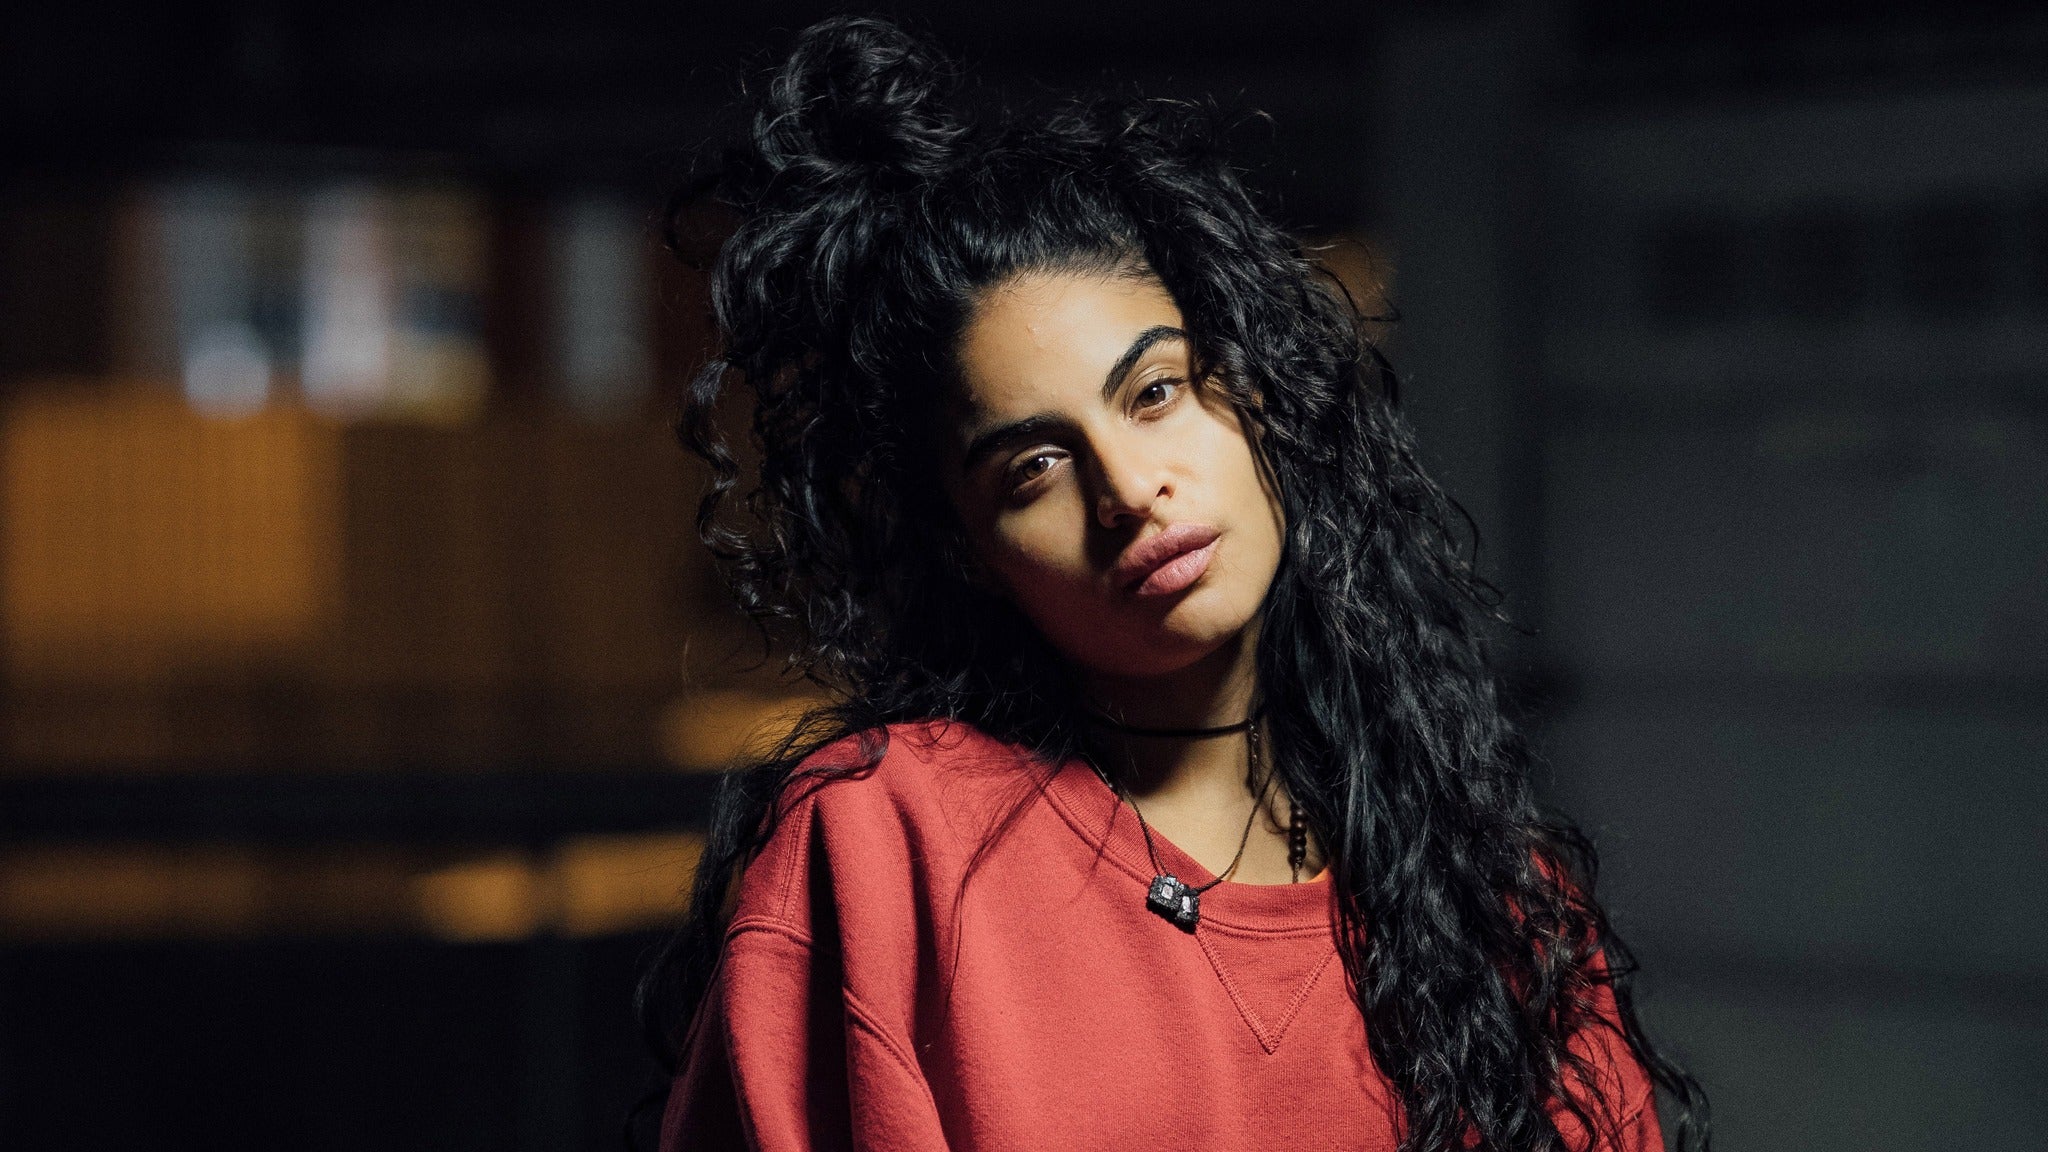 Image used with permission from Ticketmaster | Jessie Reyez tickets